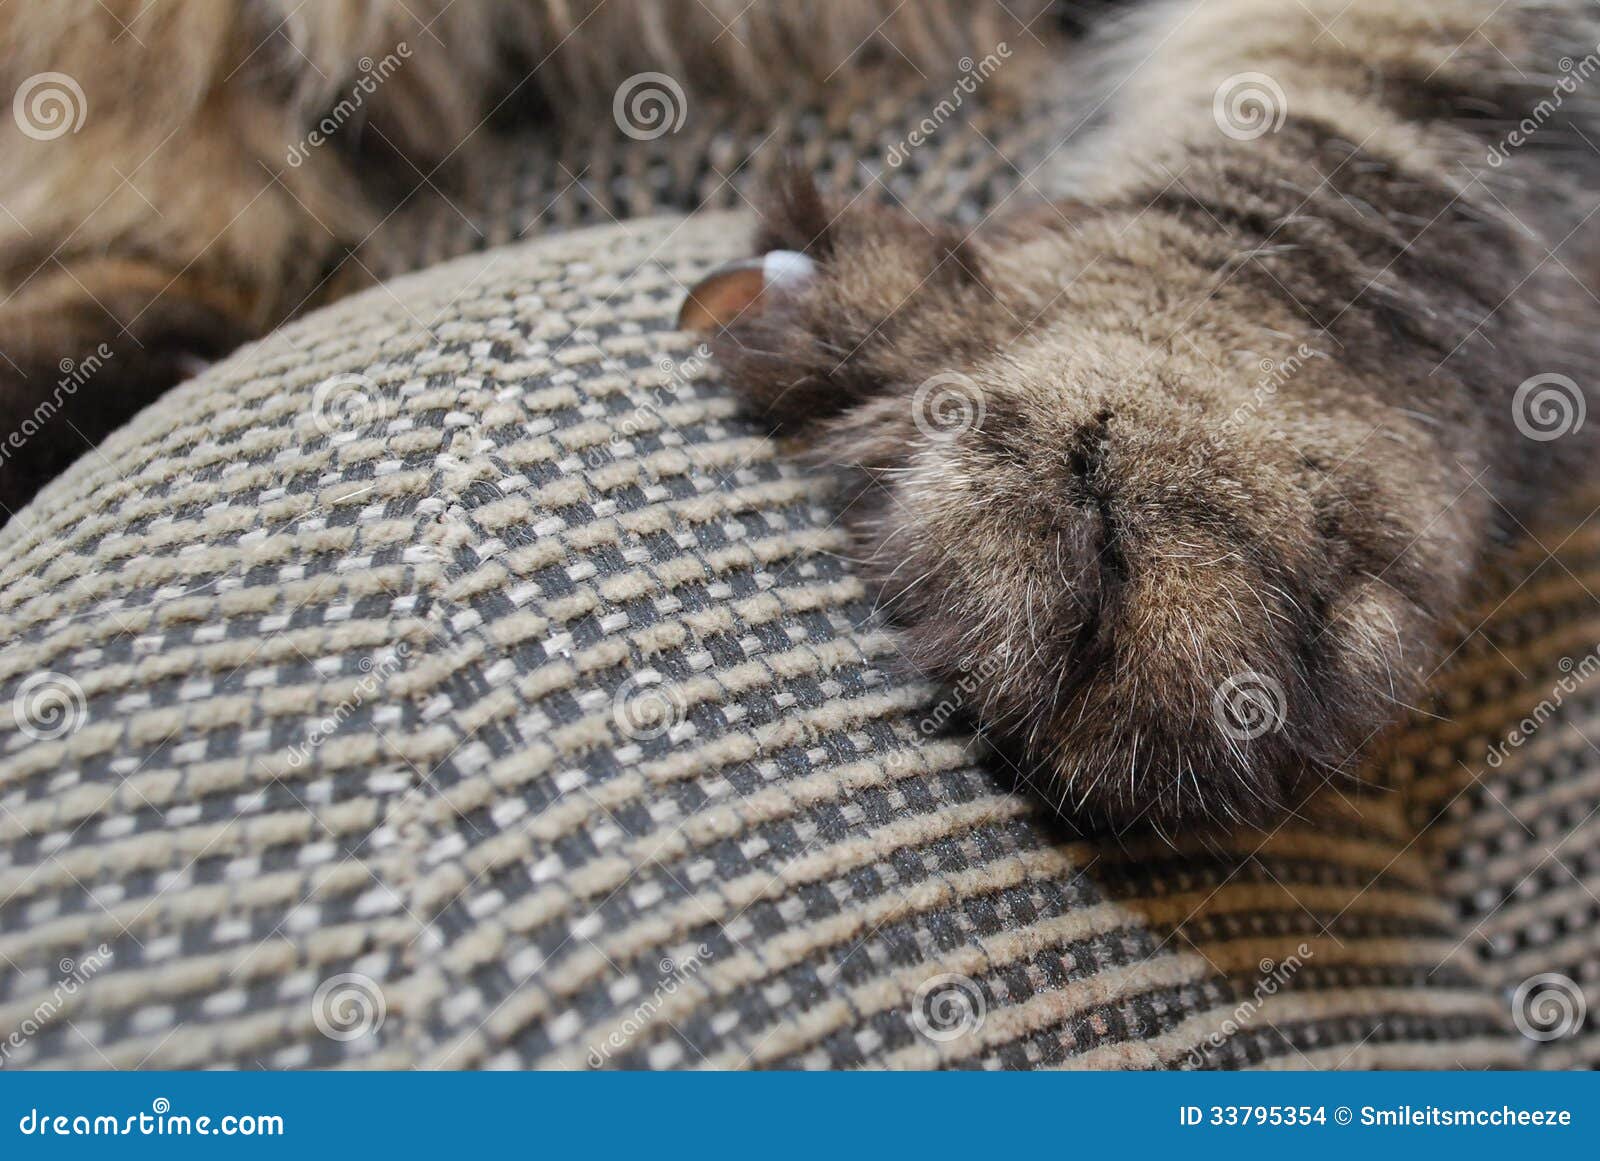 Cat Claw In The Furniture Stock Photo Image Of Animal 33795354